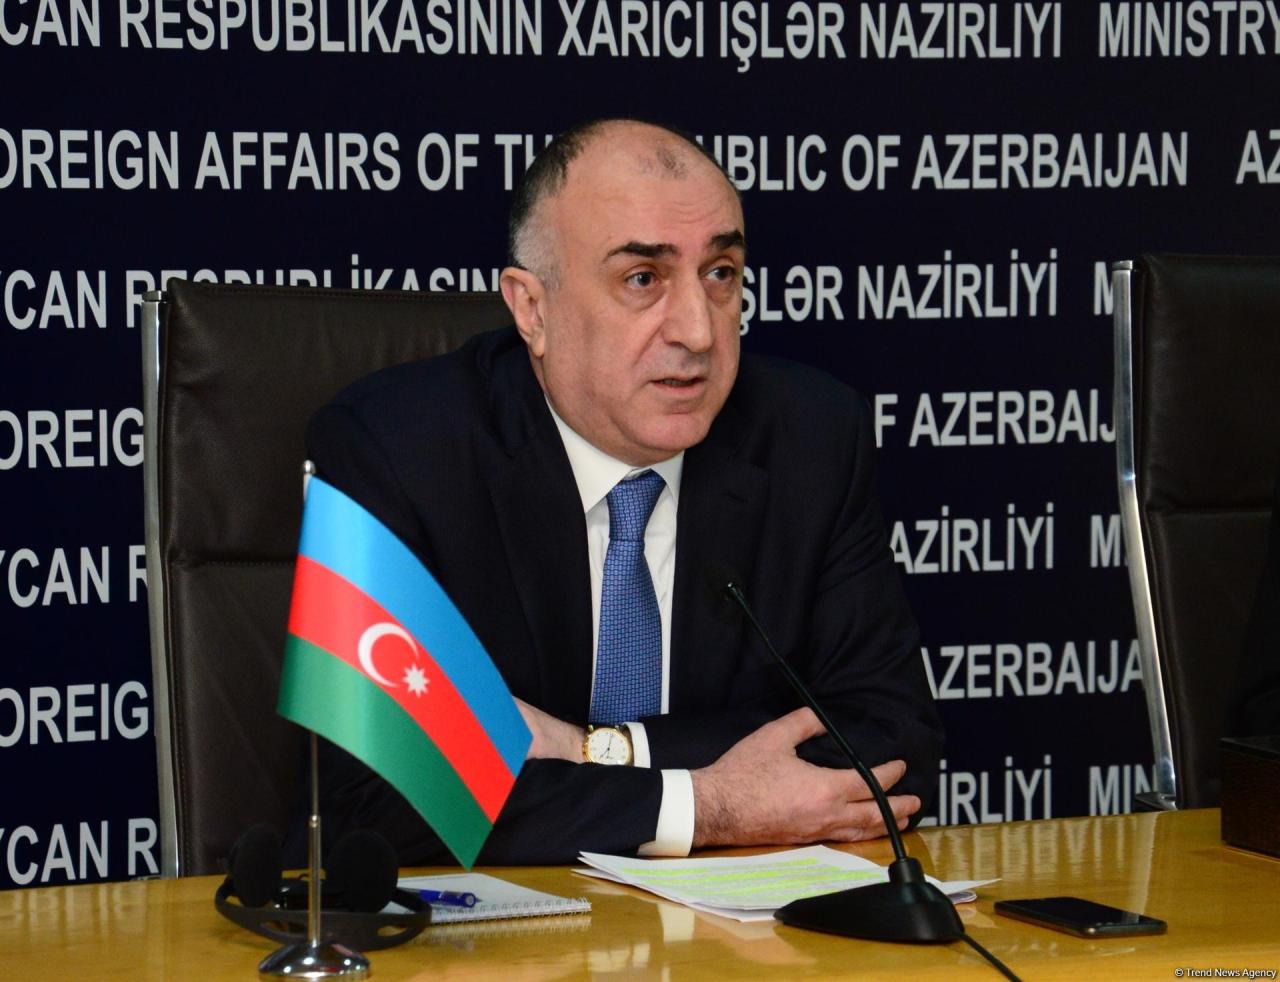 France to continue to help resolve Karabakh conflict - Azerbaijan's FM [PHOTO]